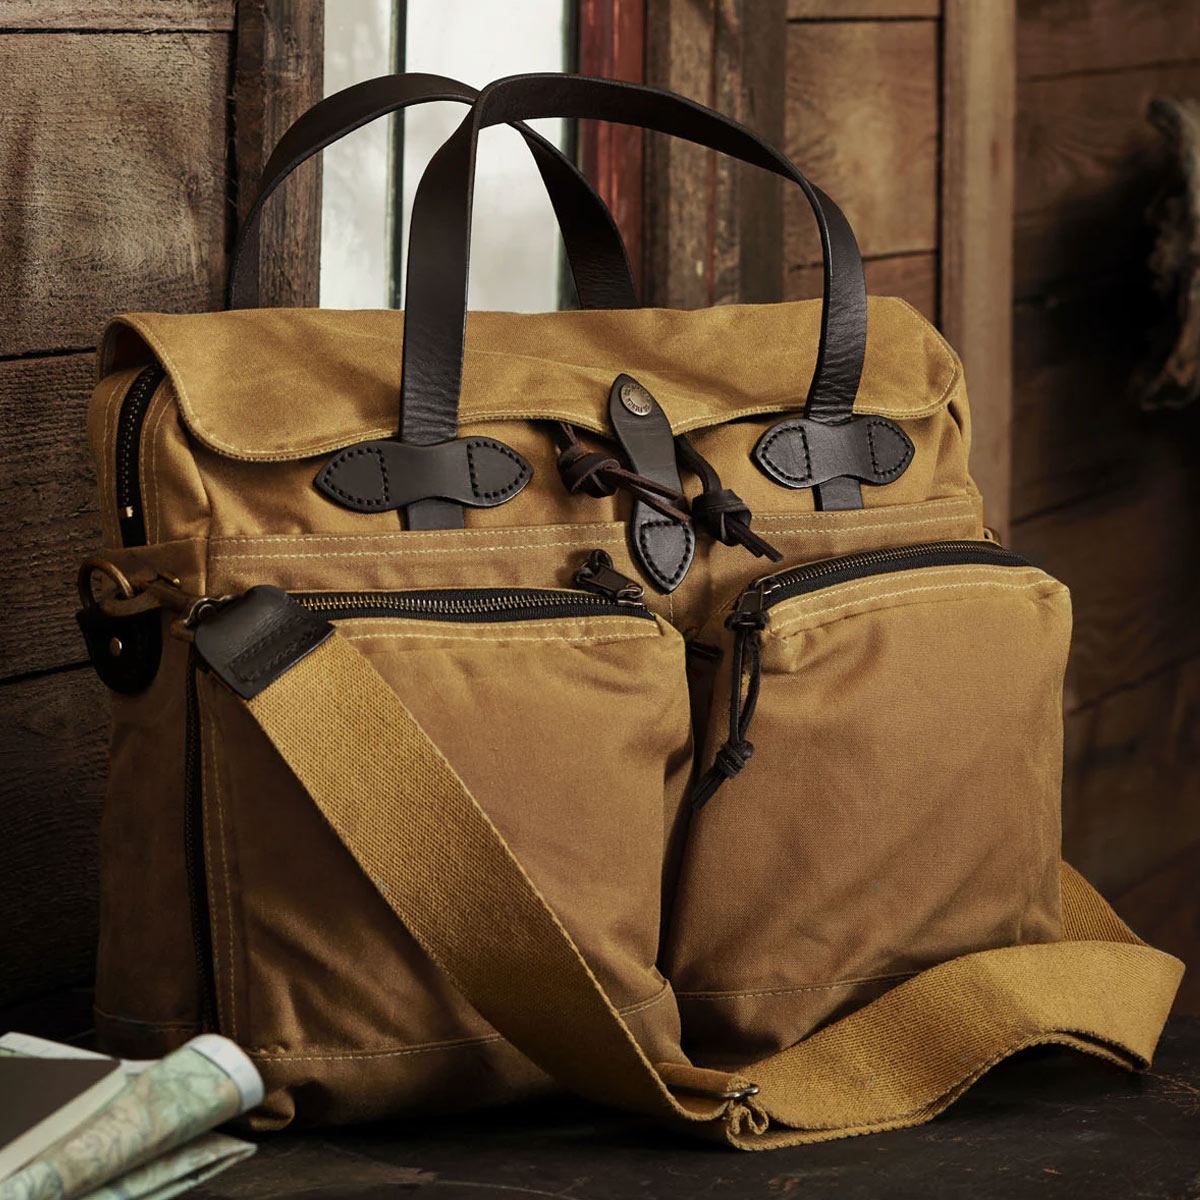 Filson 24-Hour Tin Cloth Briefcase Dark Tan, perfect bag for a weekend away or a small business-trip